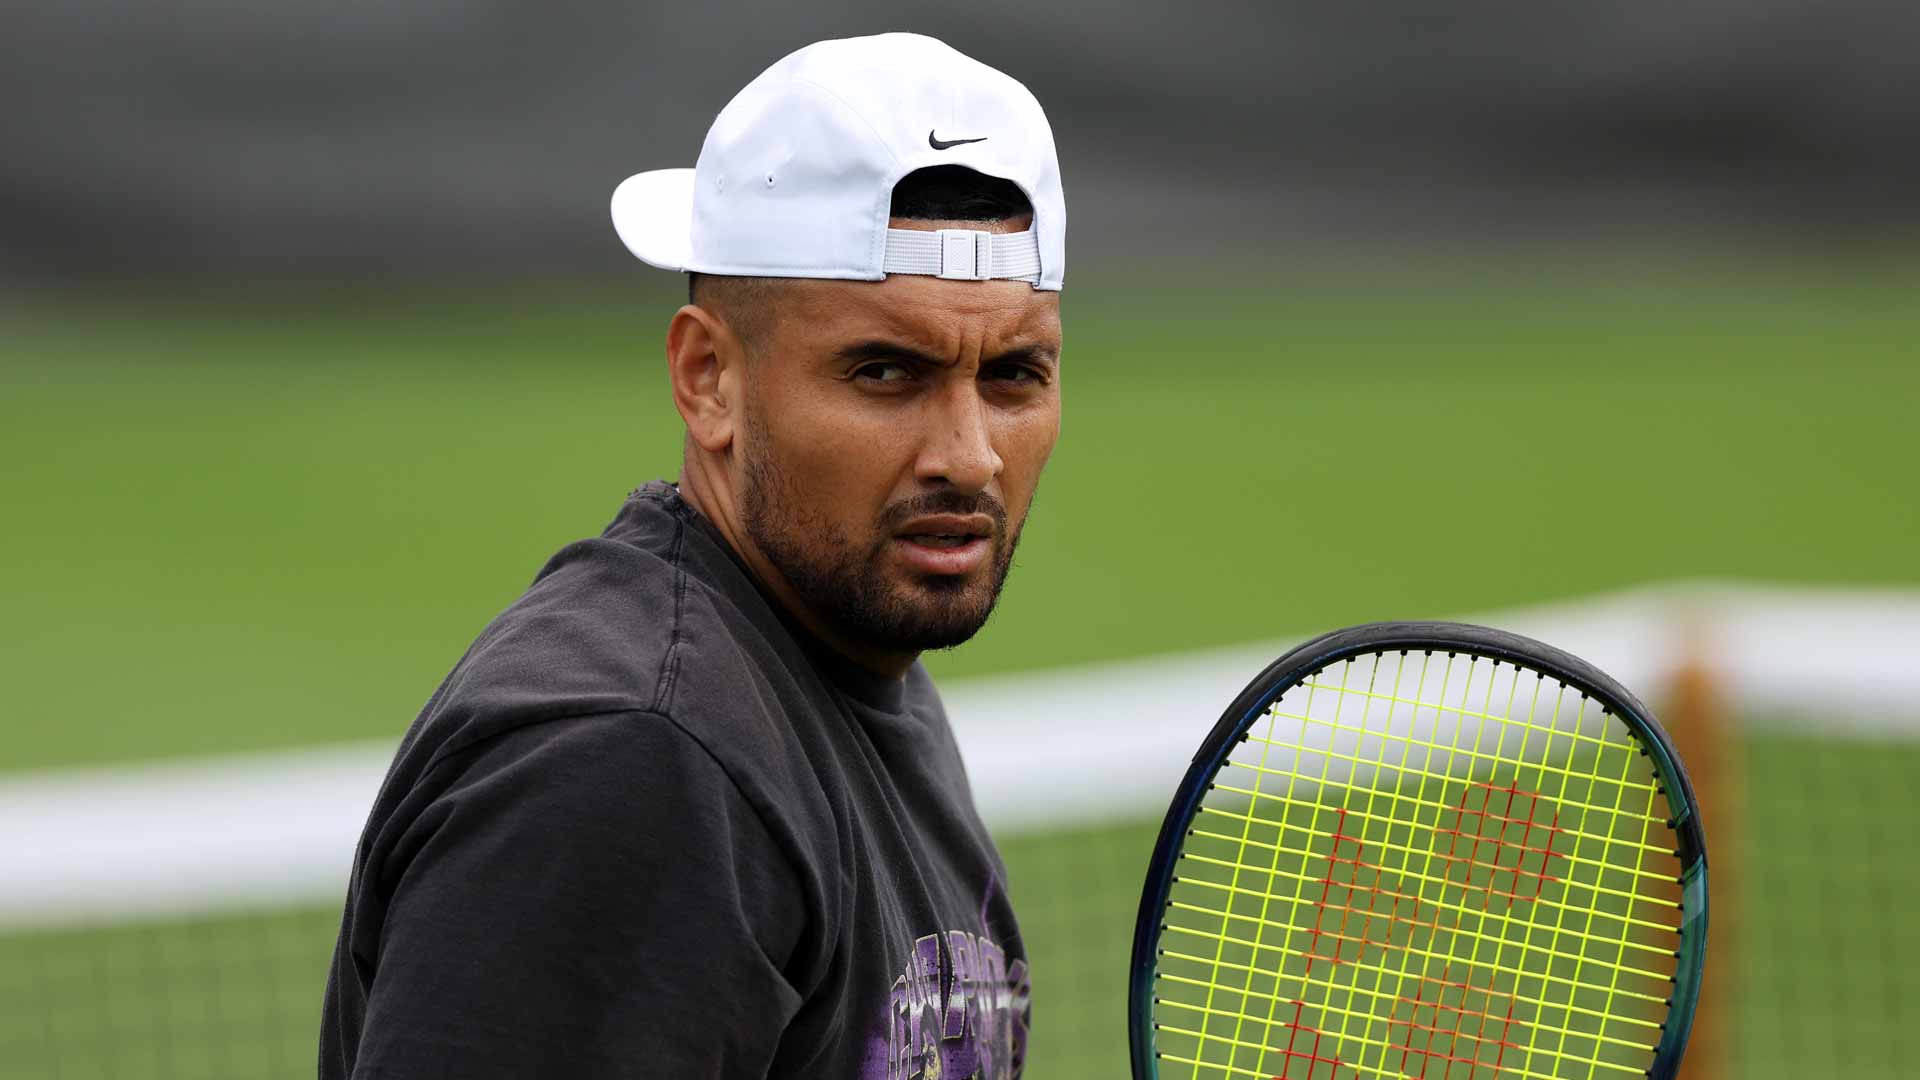 Nick Kyrgios withdraws from the tournament where he reached his first major final one year ago.